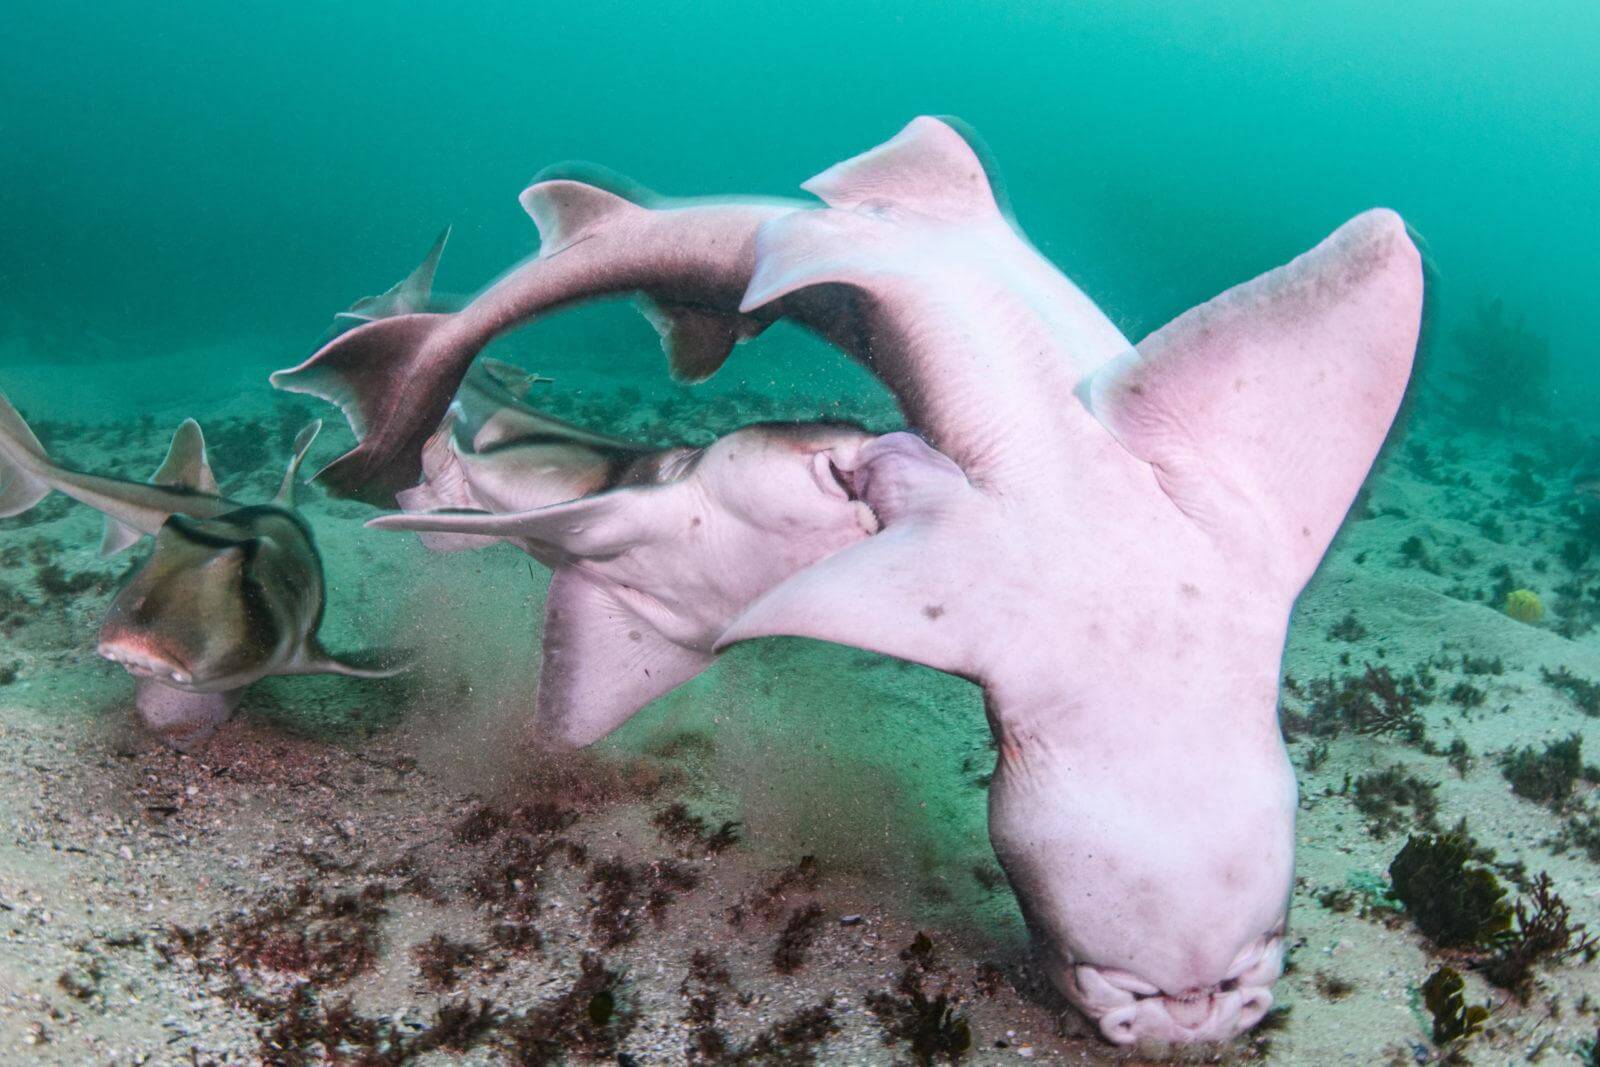 Extremely Rare Images of Port Jackson Sharks Mating